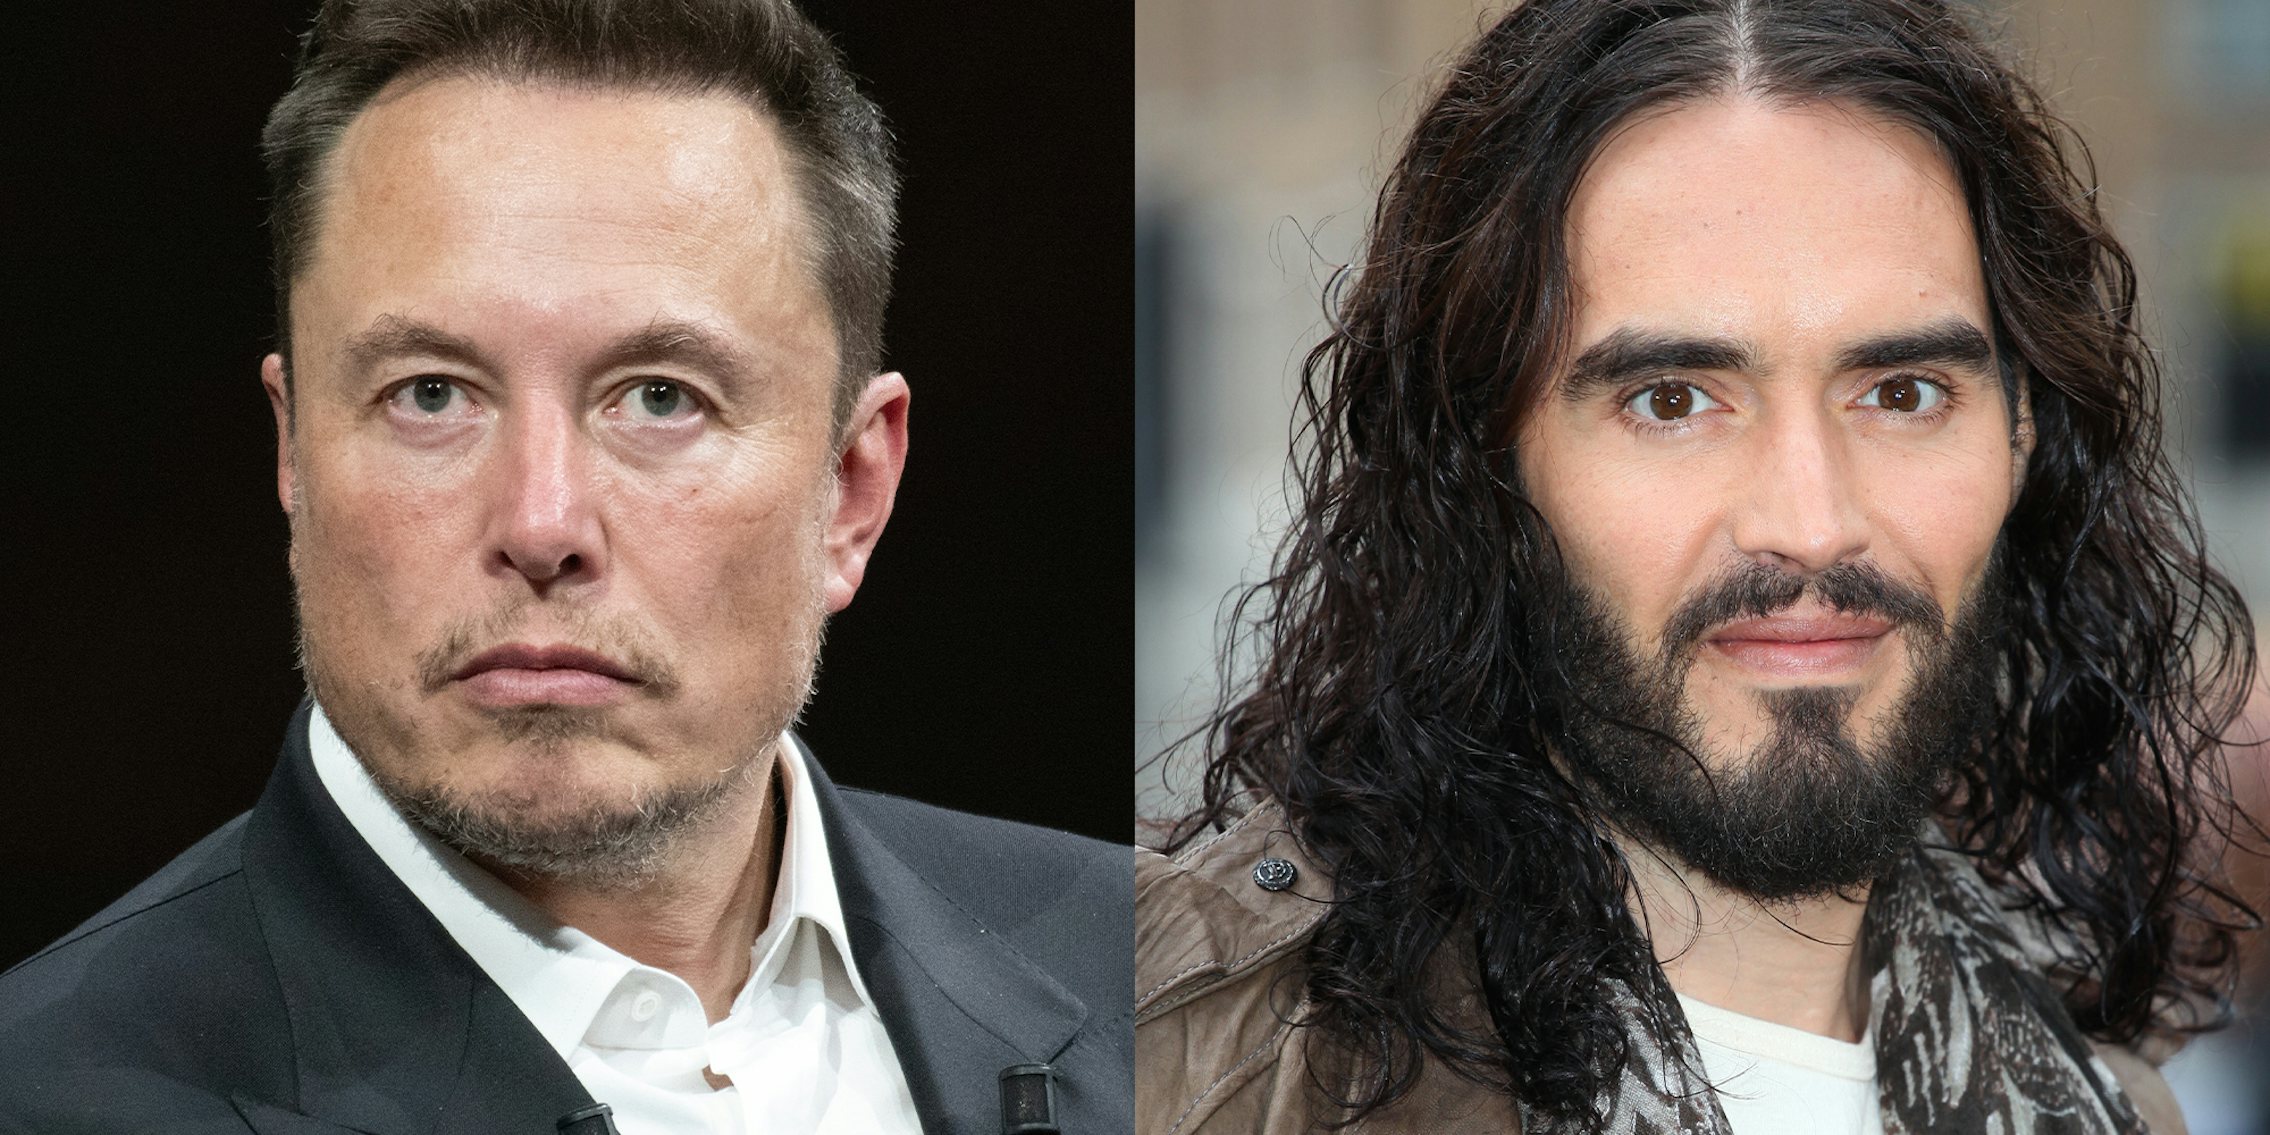 Elon Musk defends Russell Brand amid wave of sexual assault allegations